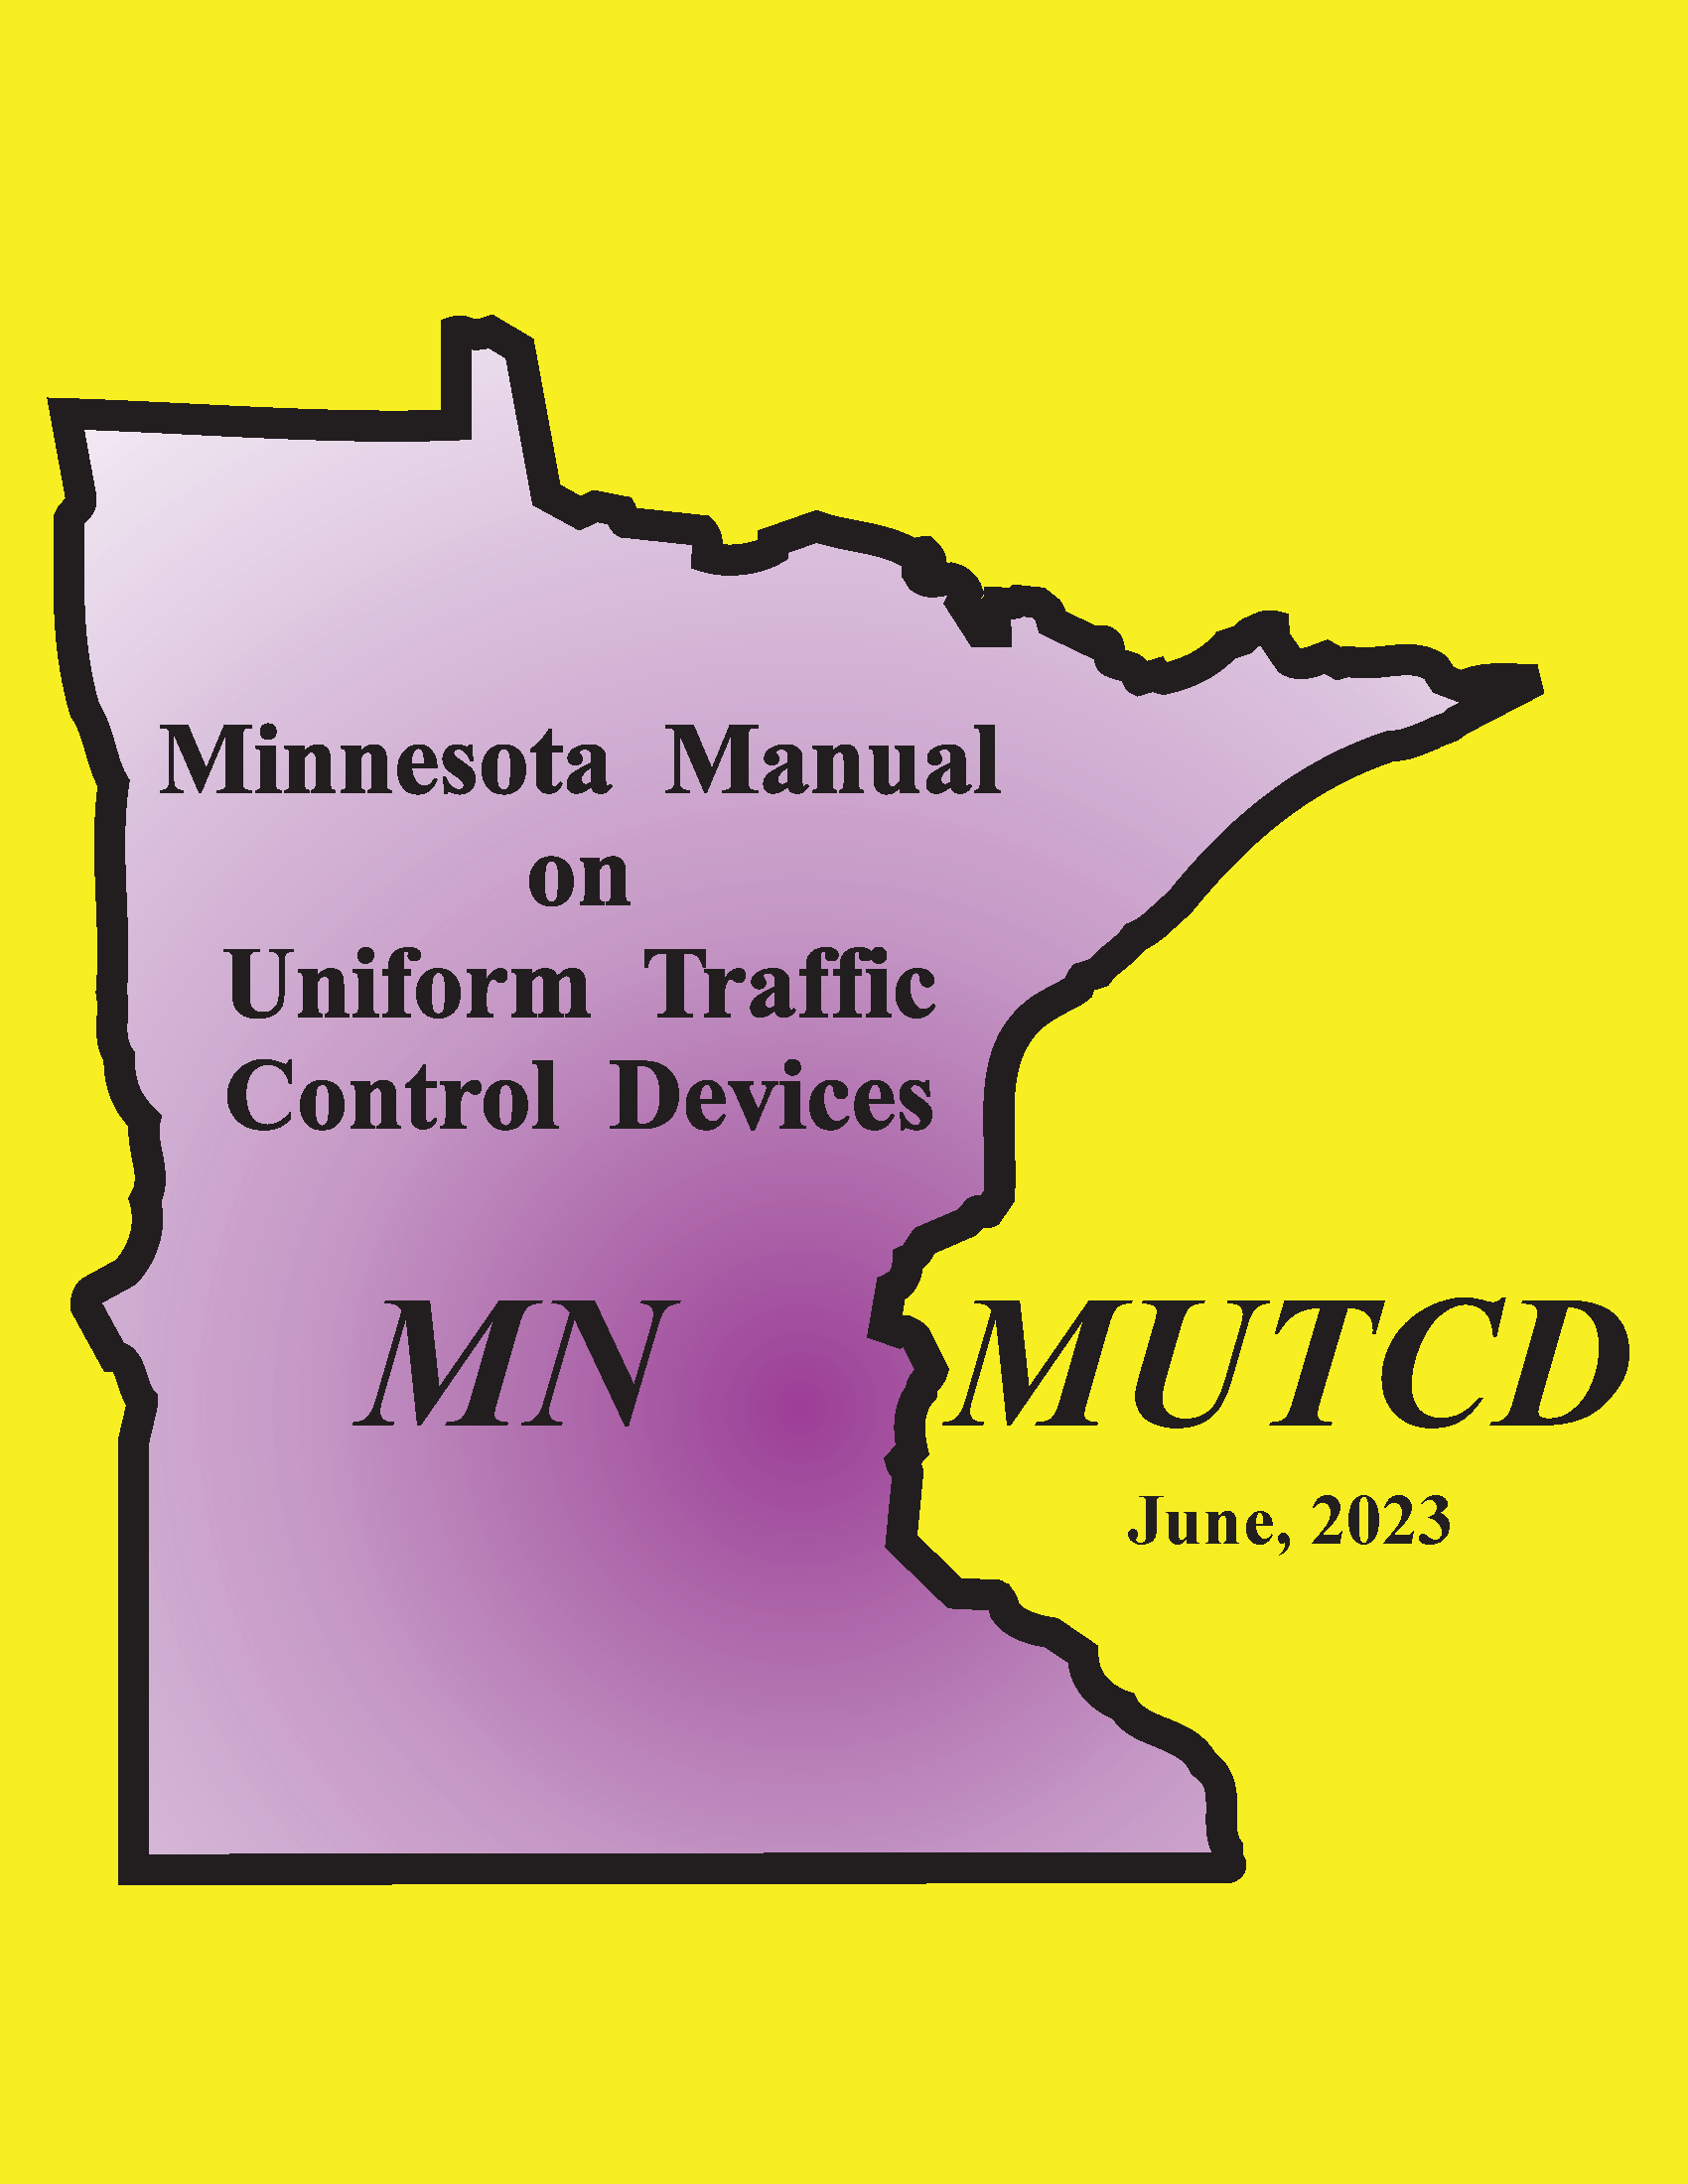 minnesota manual on uniform traffic control devices cover